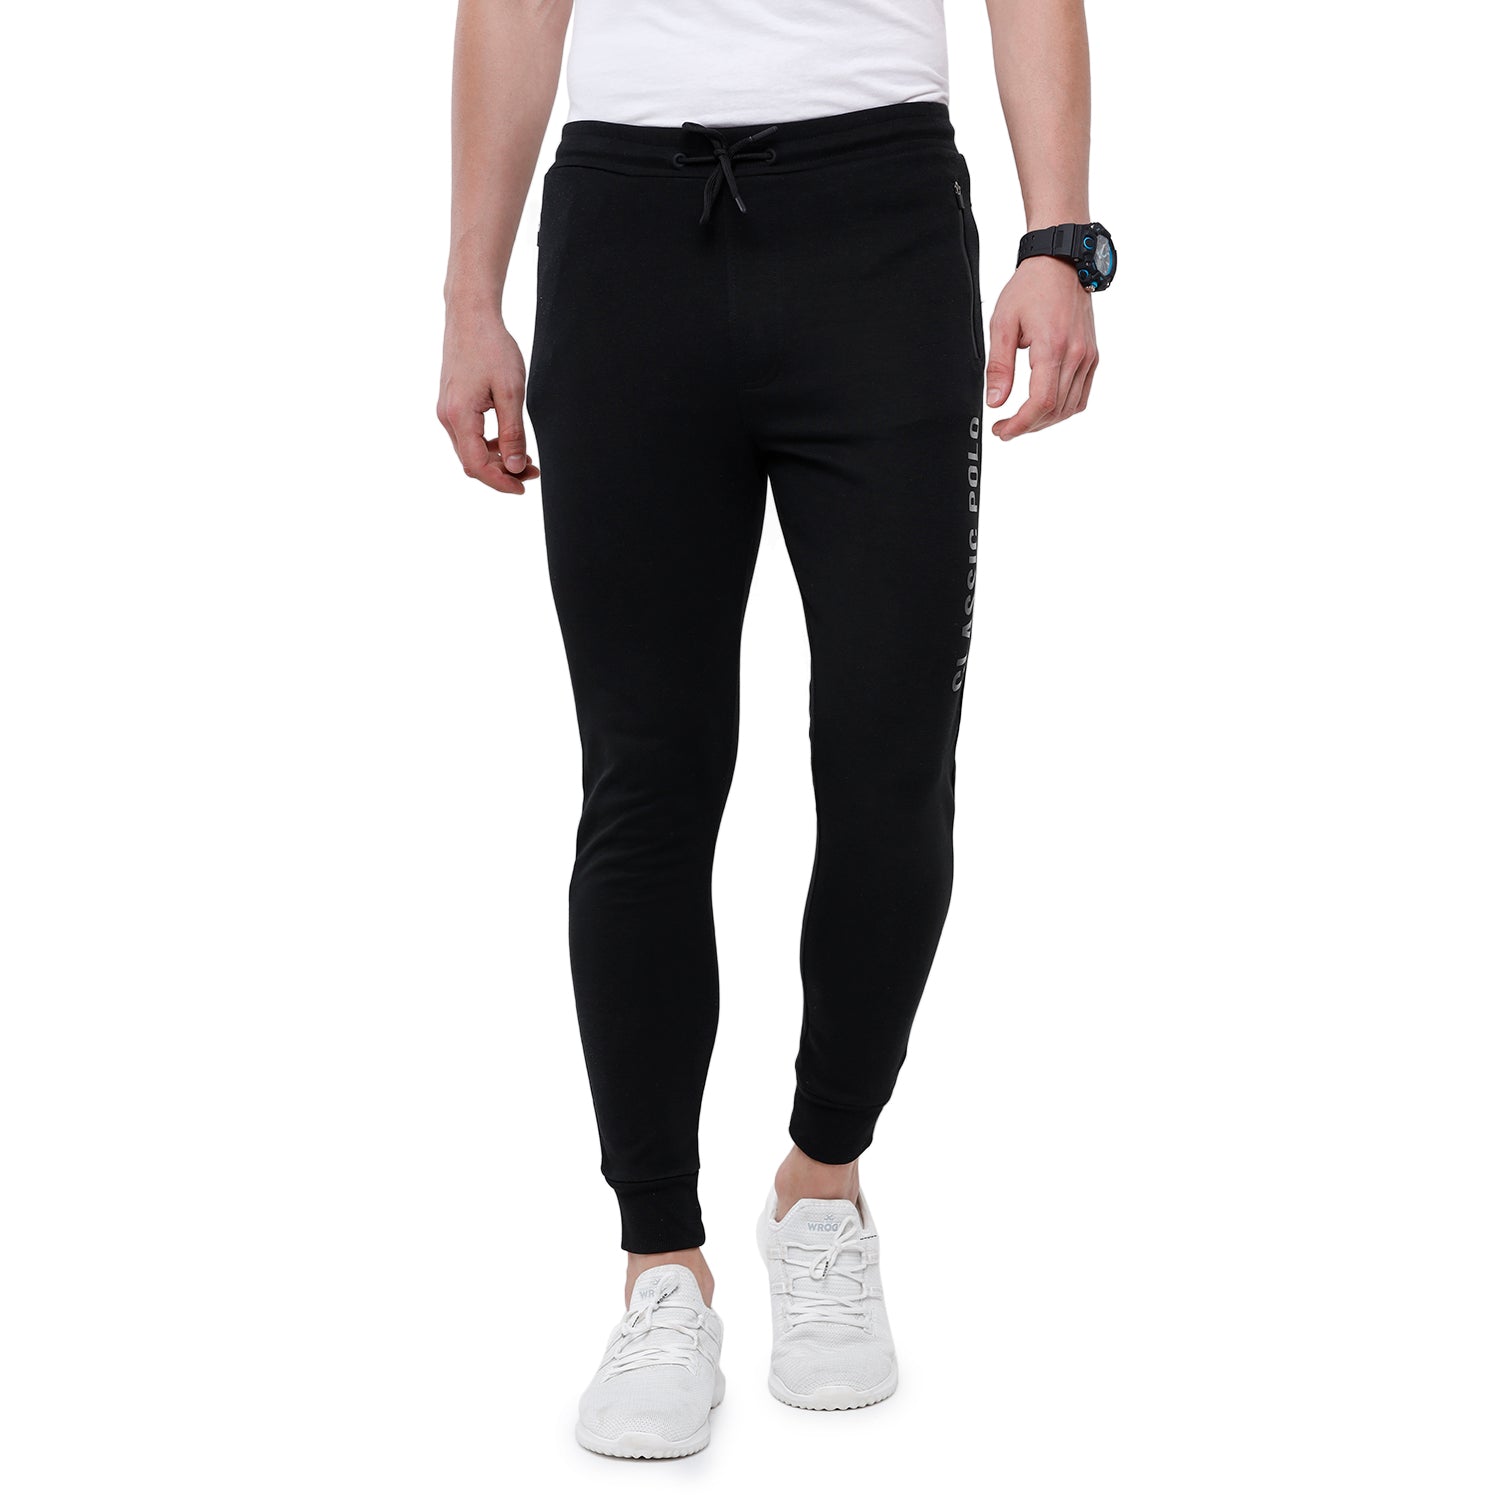 Classic Polo Men's Black Solid Melange Slim Fit Trendy Jogger Pant - Gioz-02 A Classic Polo 